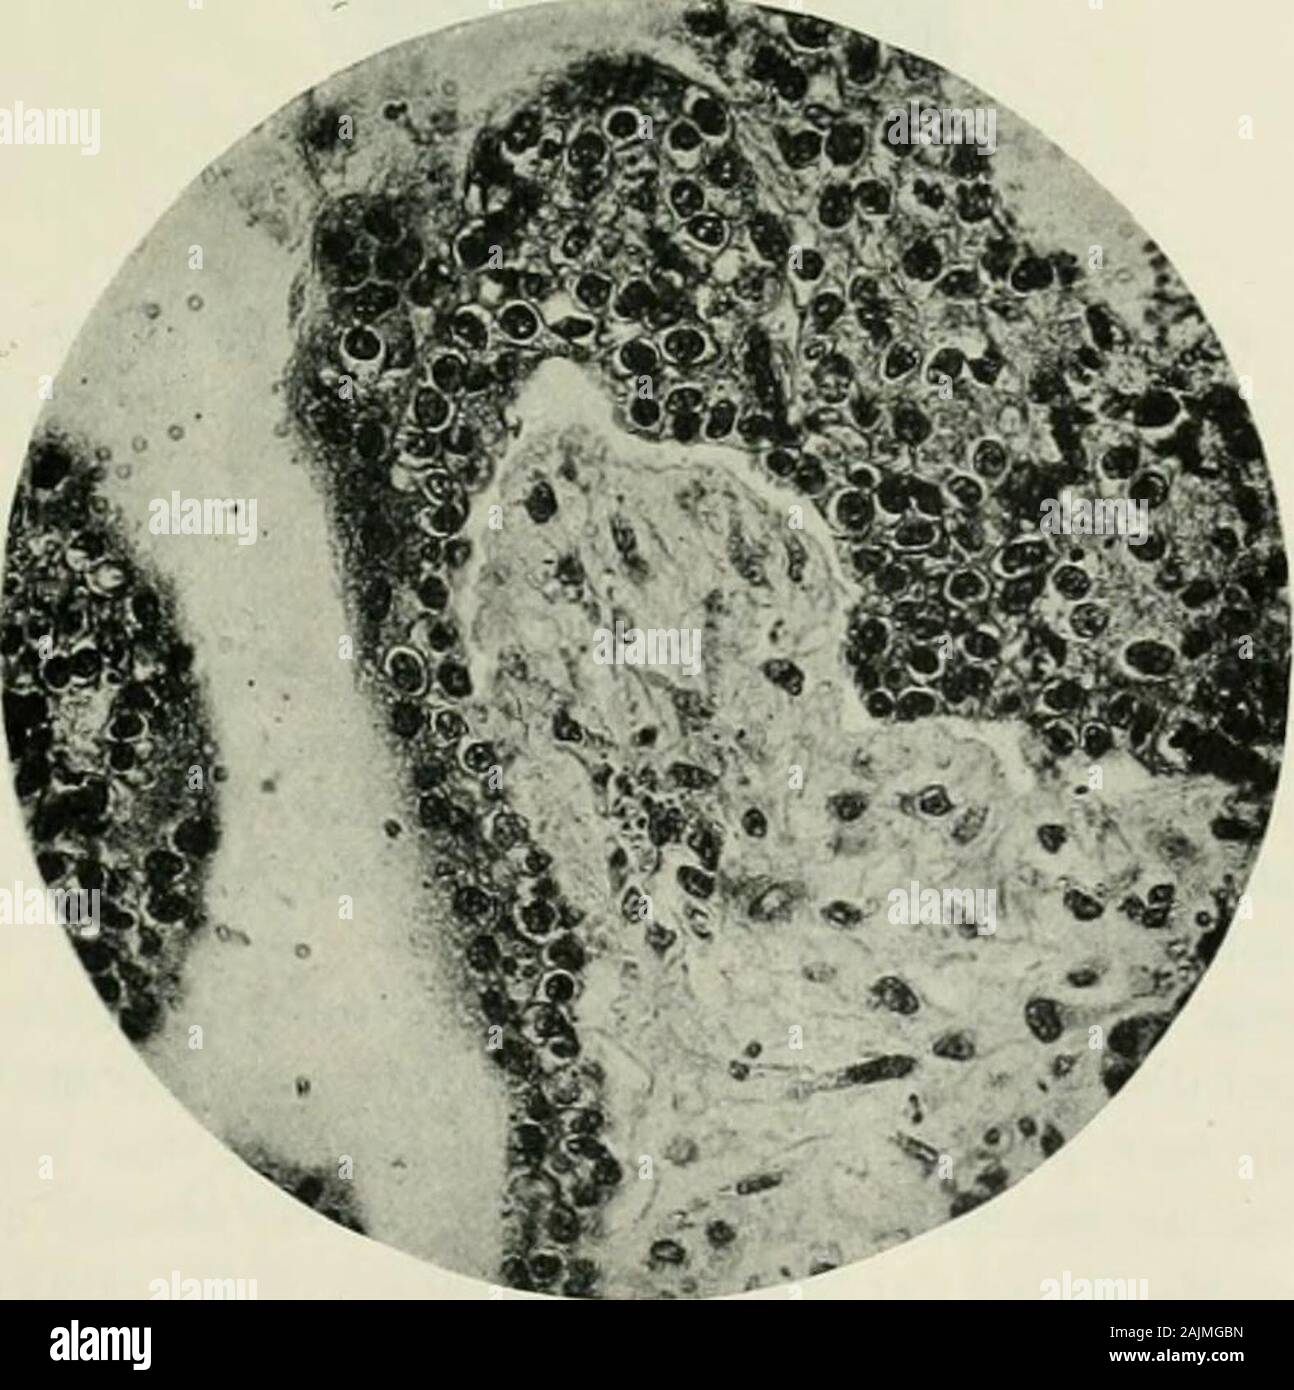 Gynecological diagnosis and pathology . Fig. 140.—Chorionic Villi from Cask of Tubal Pregnahcy(L.P.). Note the stroma of embryonic tissue and the covering of epithelium] Langhanslayer and syncytium.. Fig. 141.—Chorionic Villi from Case of Tidal Pregnancy (H.P.). 142 GYNECOLOGICAL PATHOLOGY Changes in the Tube and Uterus.—In the mucous membrane andmuscular wall of the tube there is a certain amount of reaction as theresult of the presence of the ovum. The blood-vessels dilate, the endo-thelium lining them proliferates, and some of these endothelial cells mayfind their way outwards into the tis Stock Photo